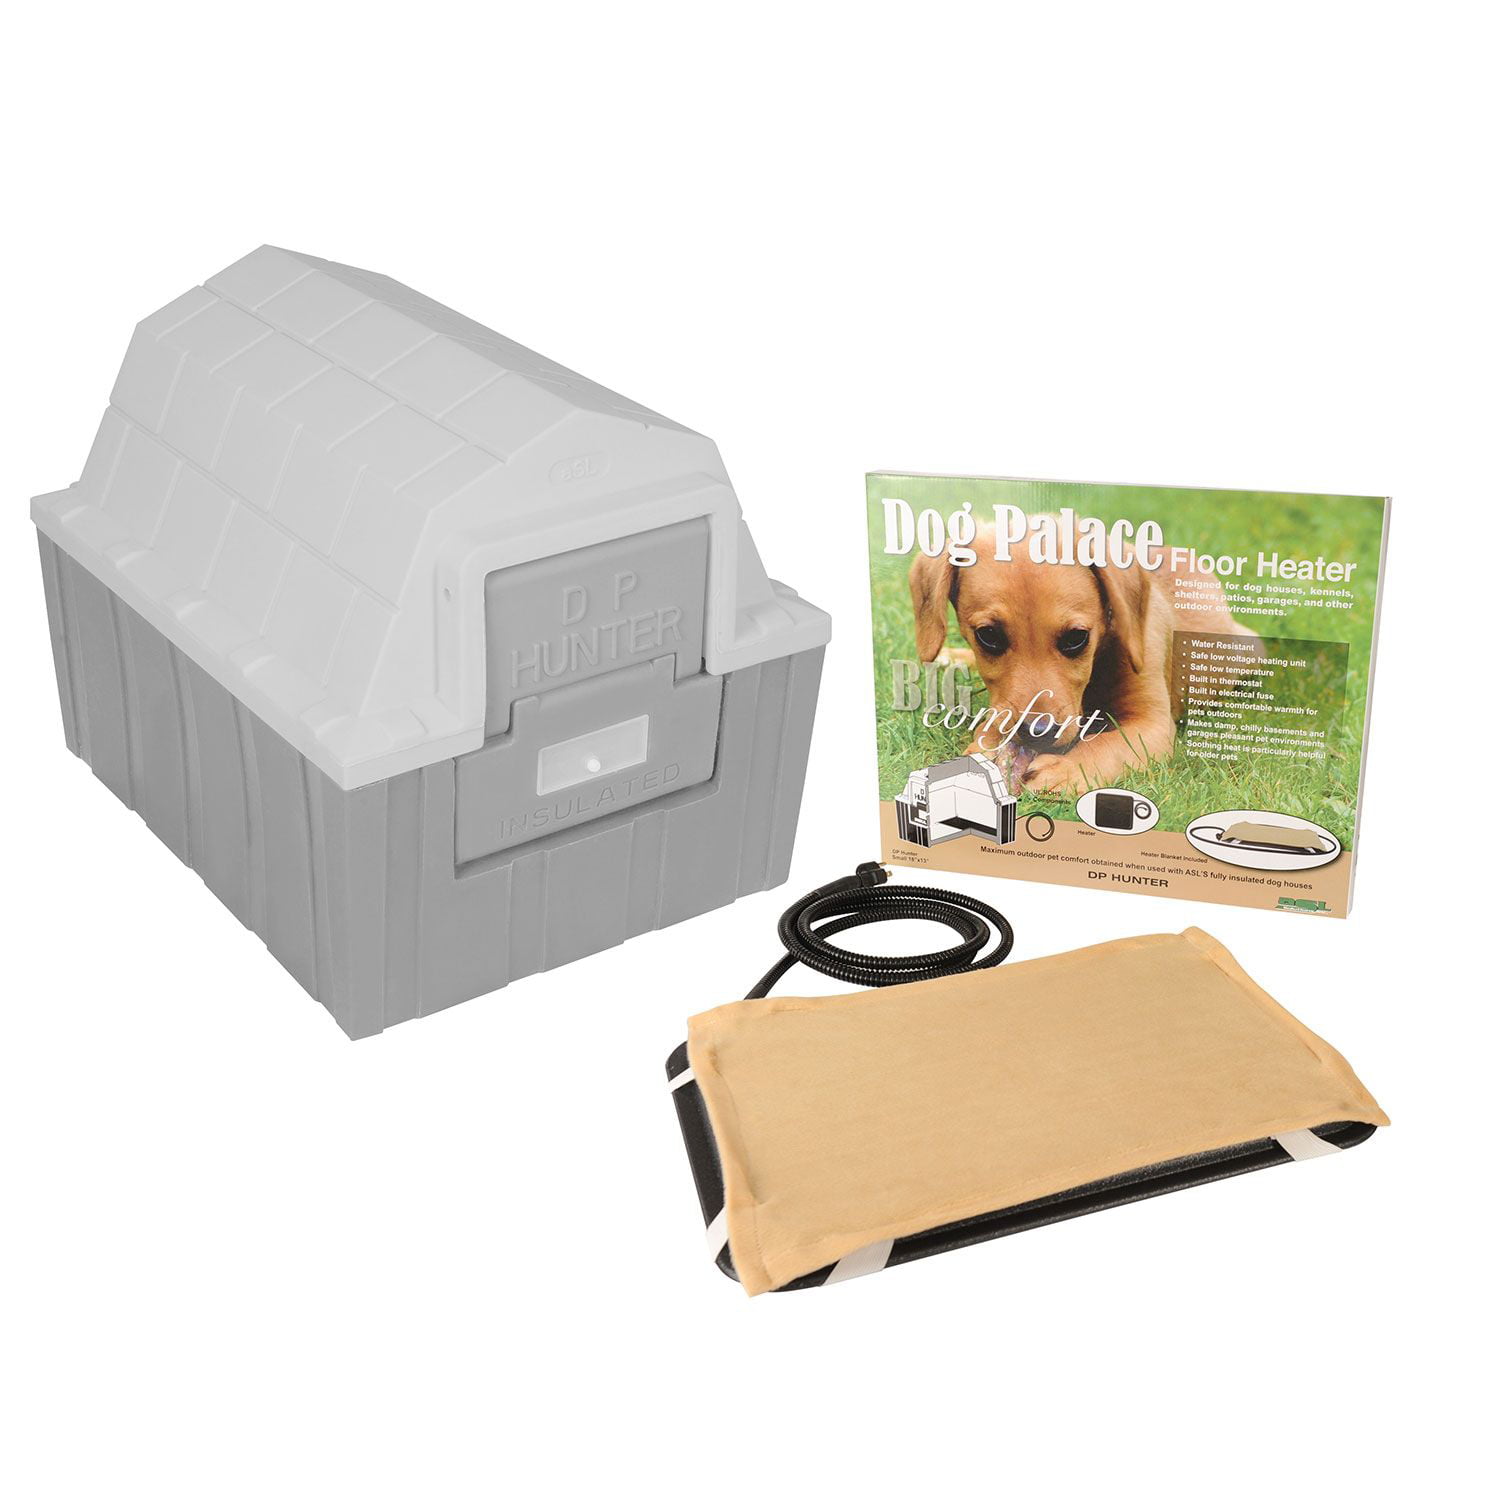 small insulated dog house